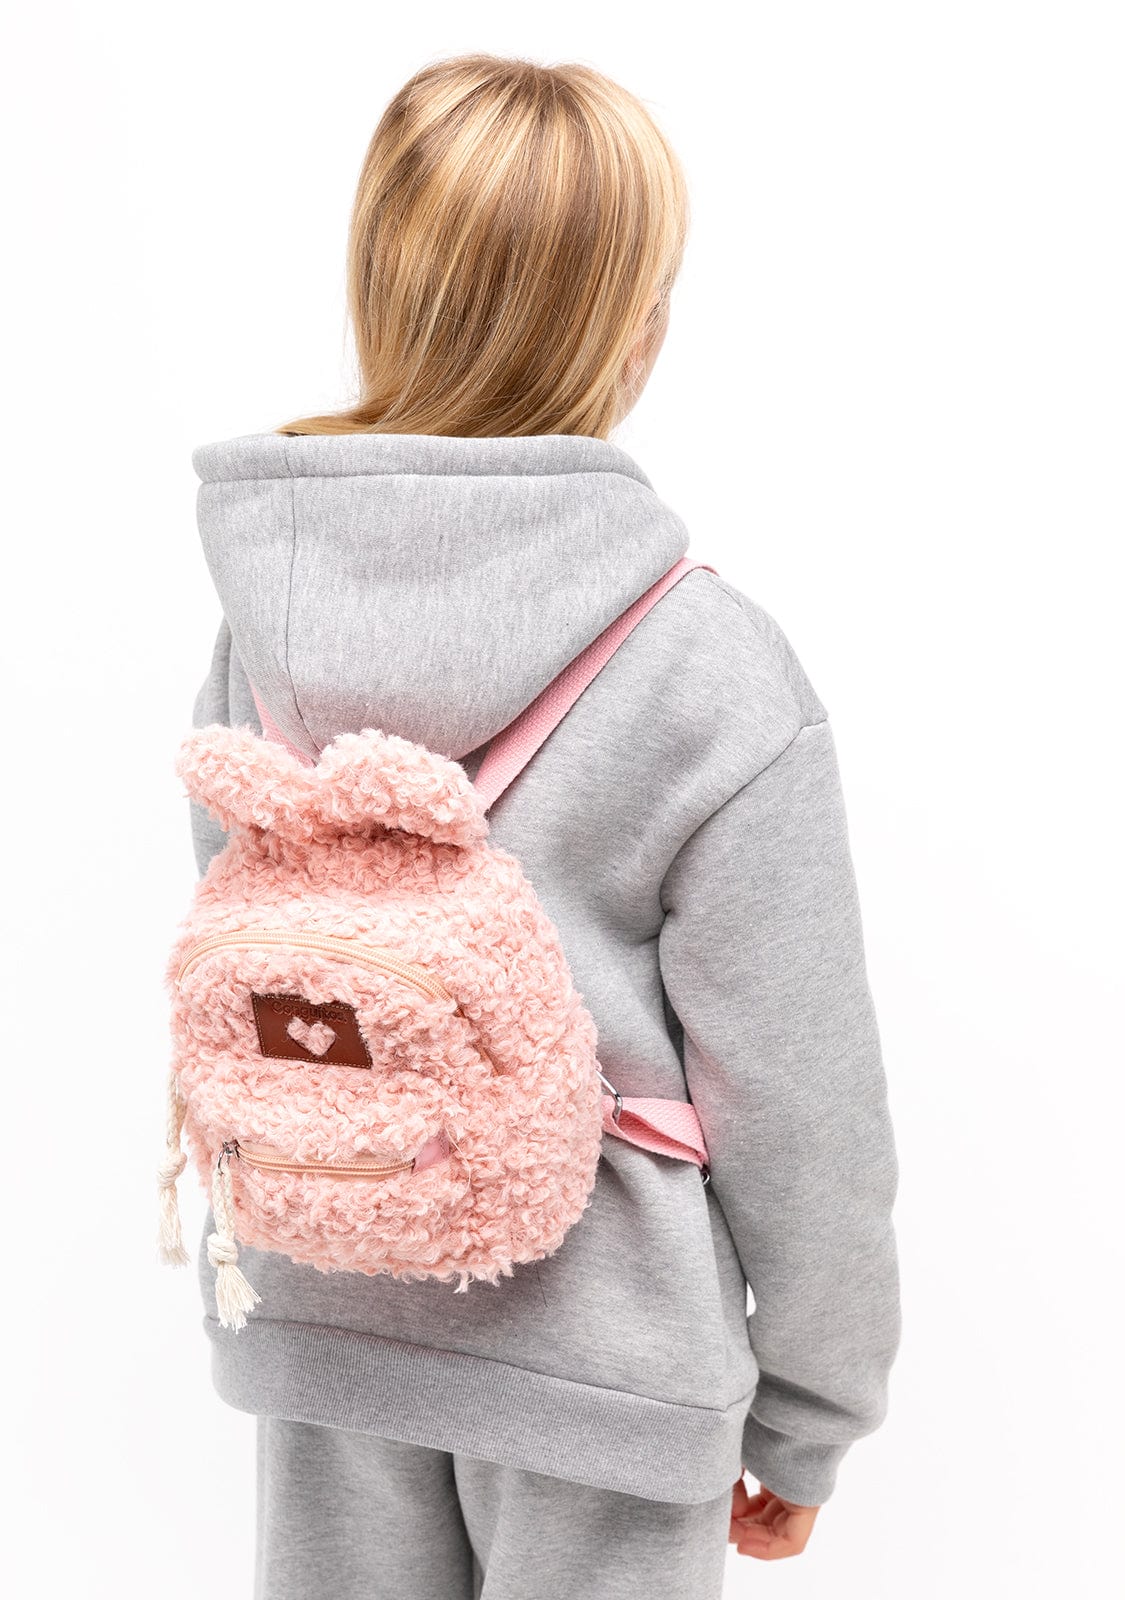 CONGUITOS TEXTIL Accessories Girl's Pink Rabbit Backpack